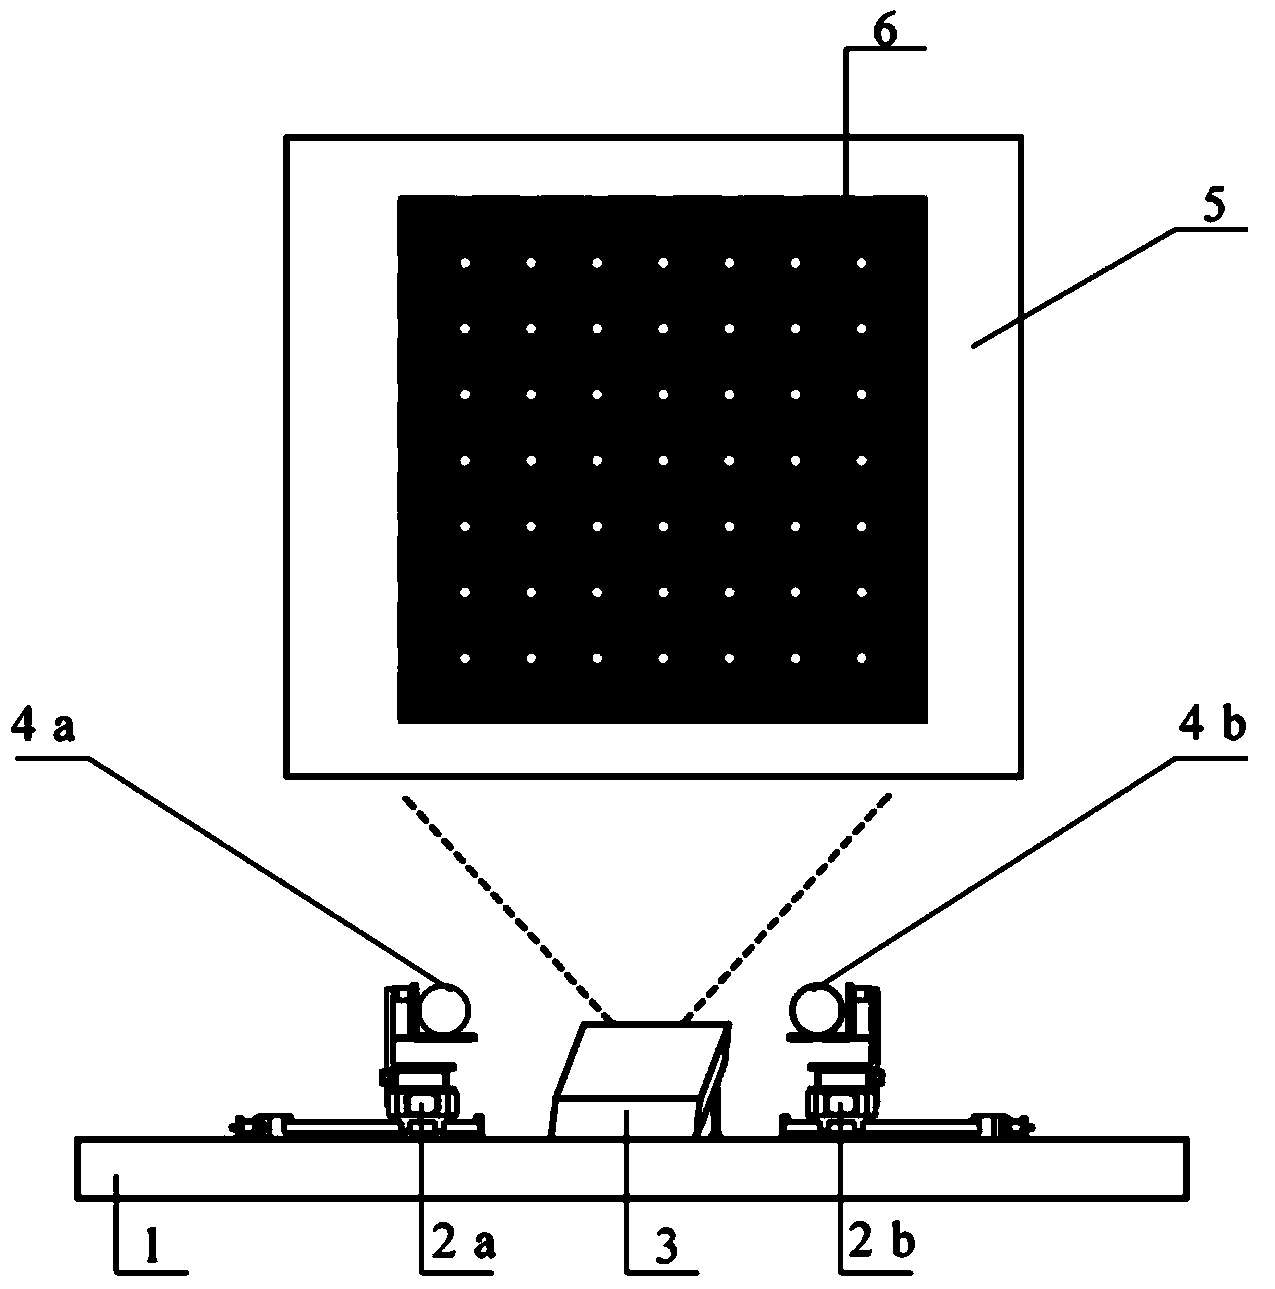 Camera calibration method based on projected Gaussian grid pattern